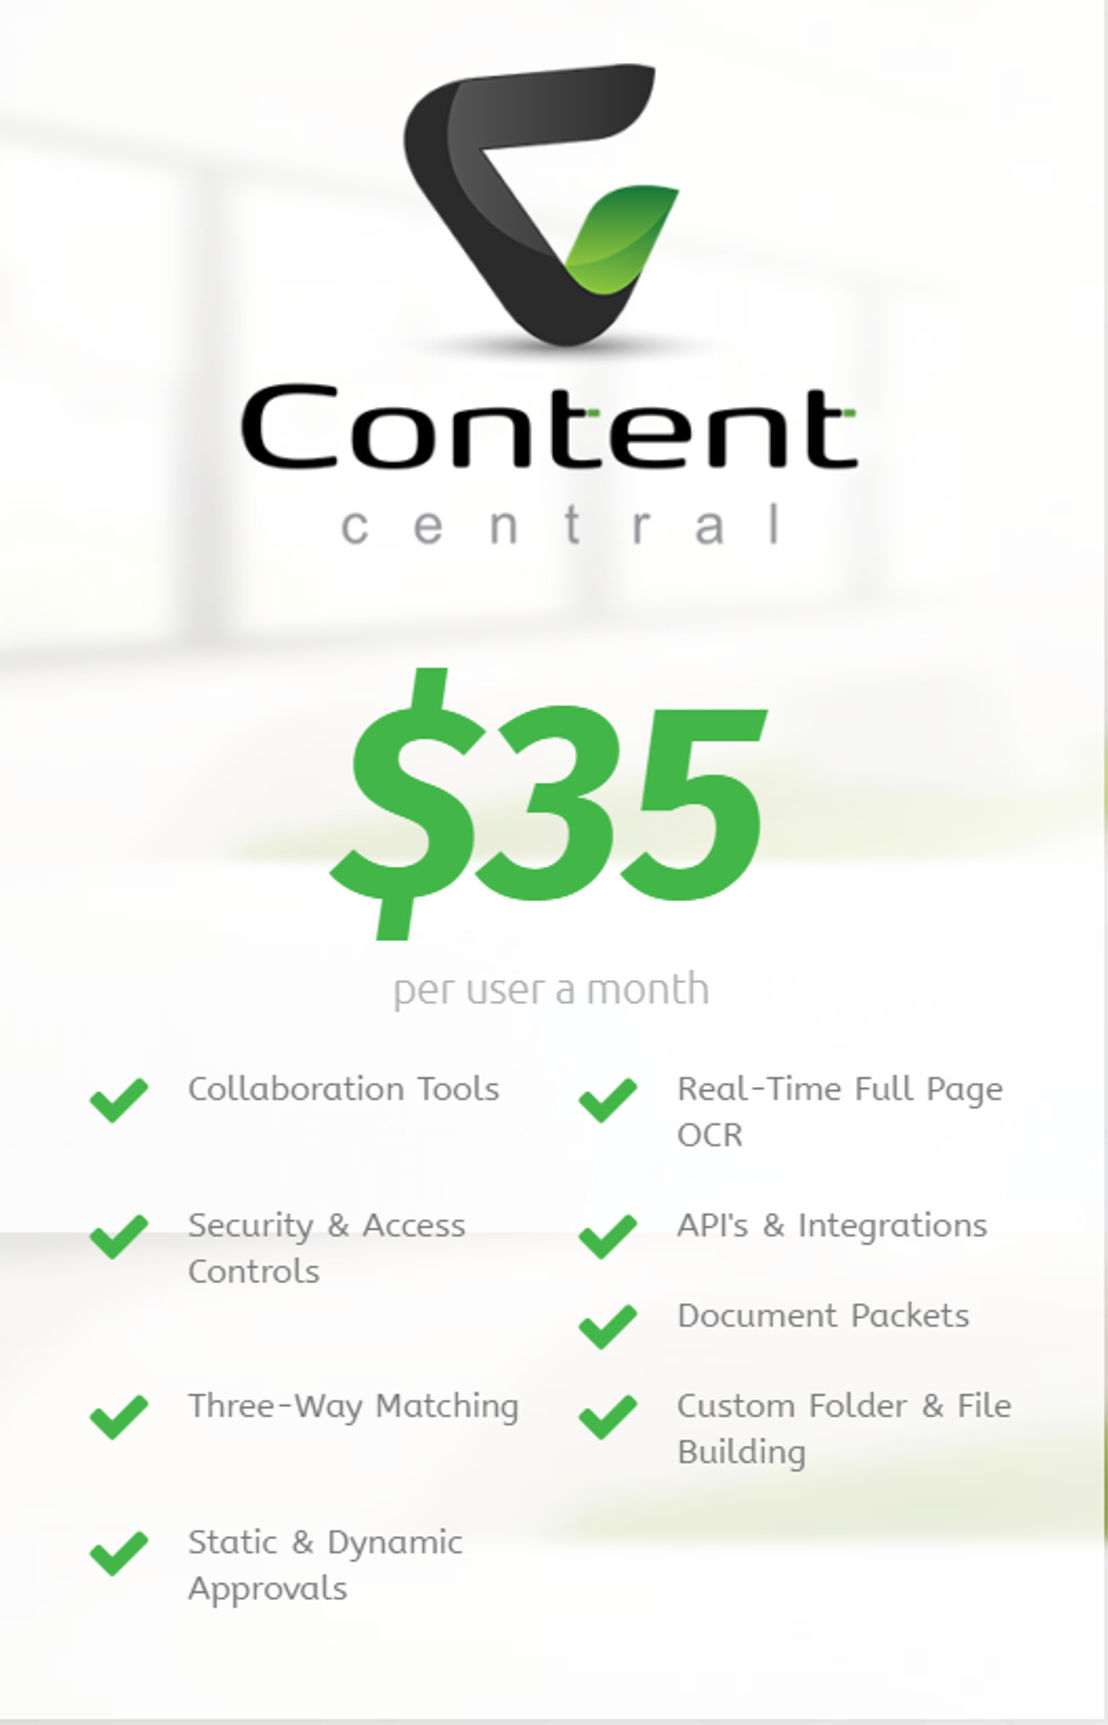 Content Central Pricing